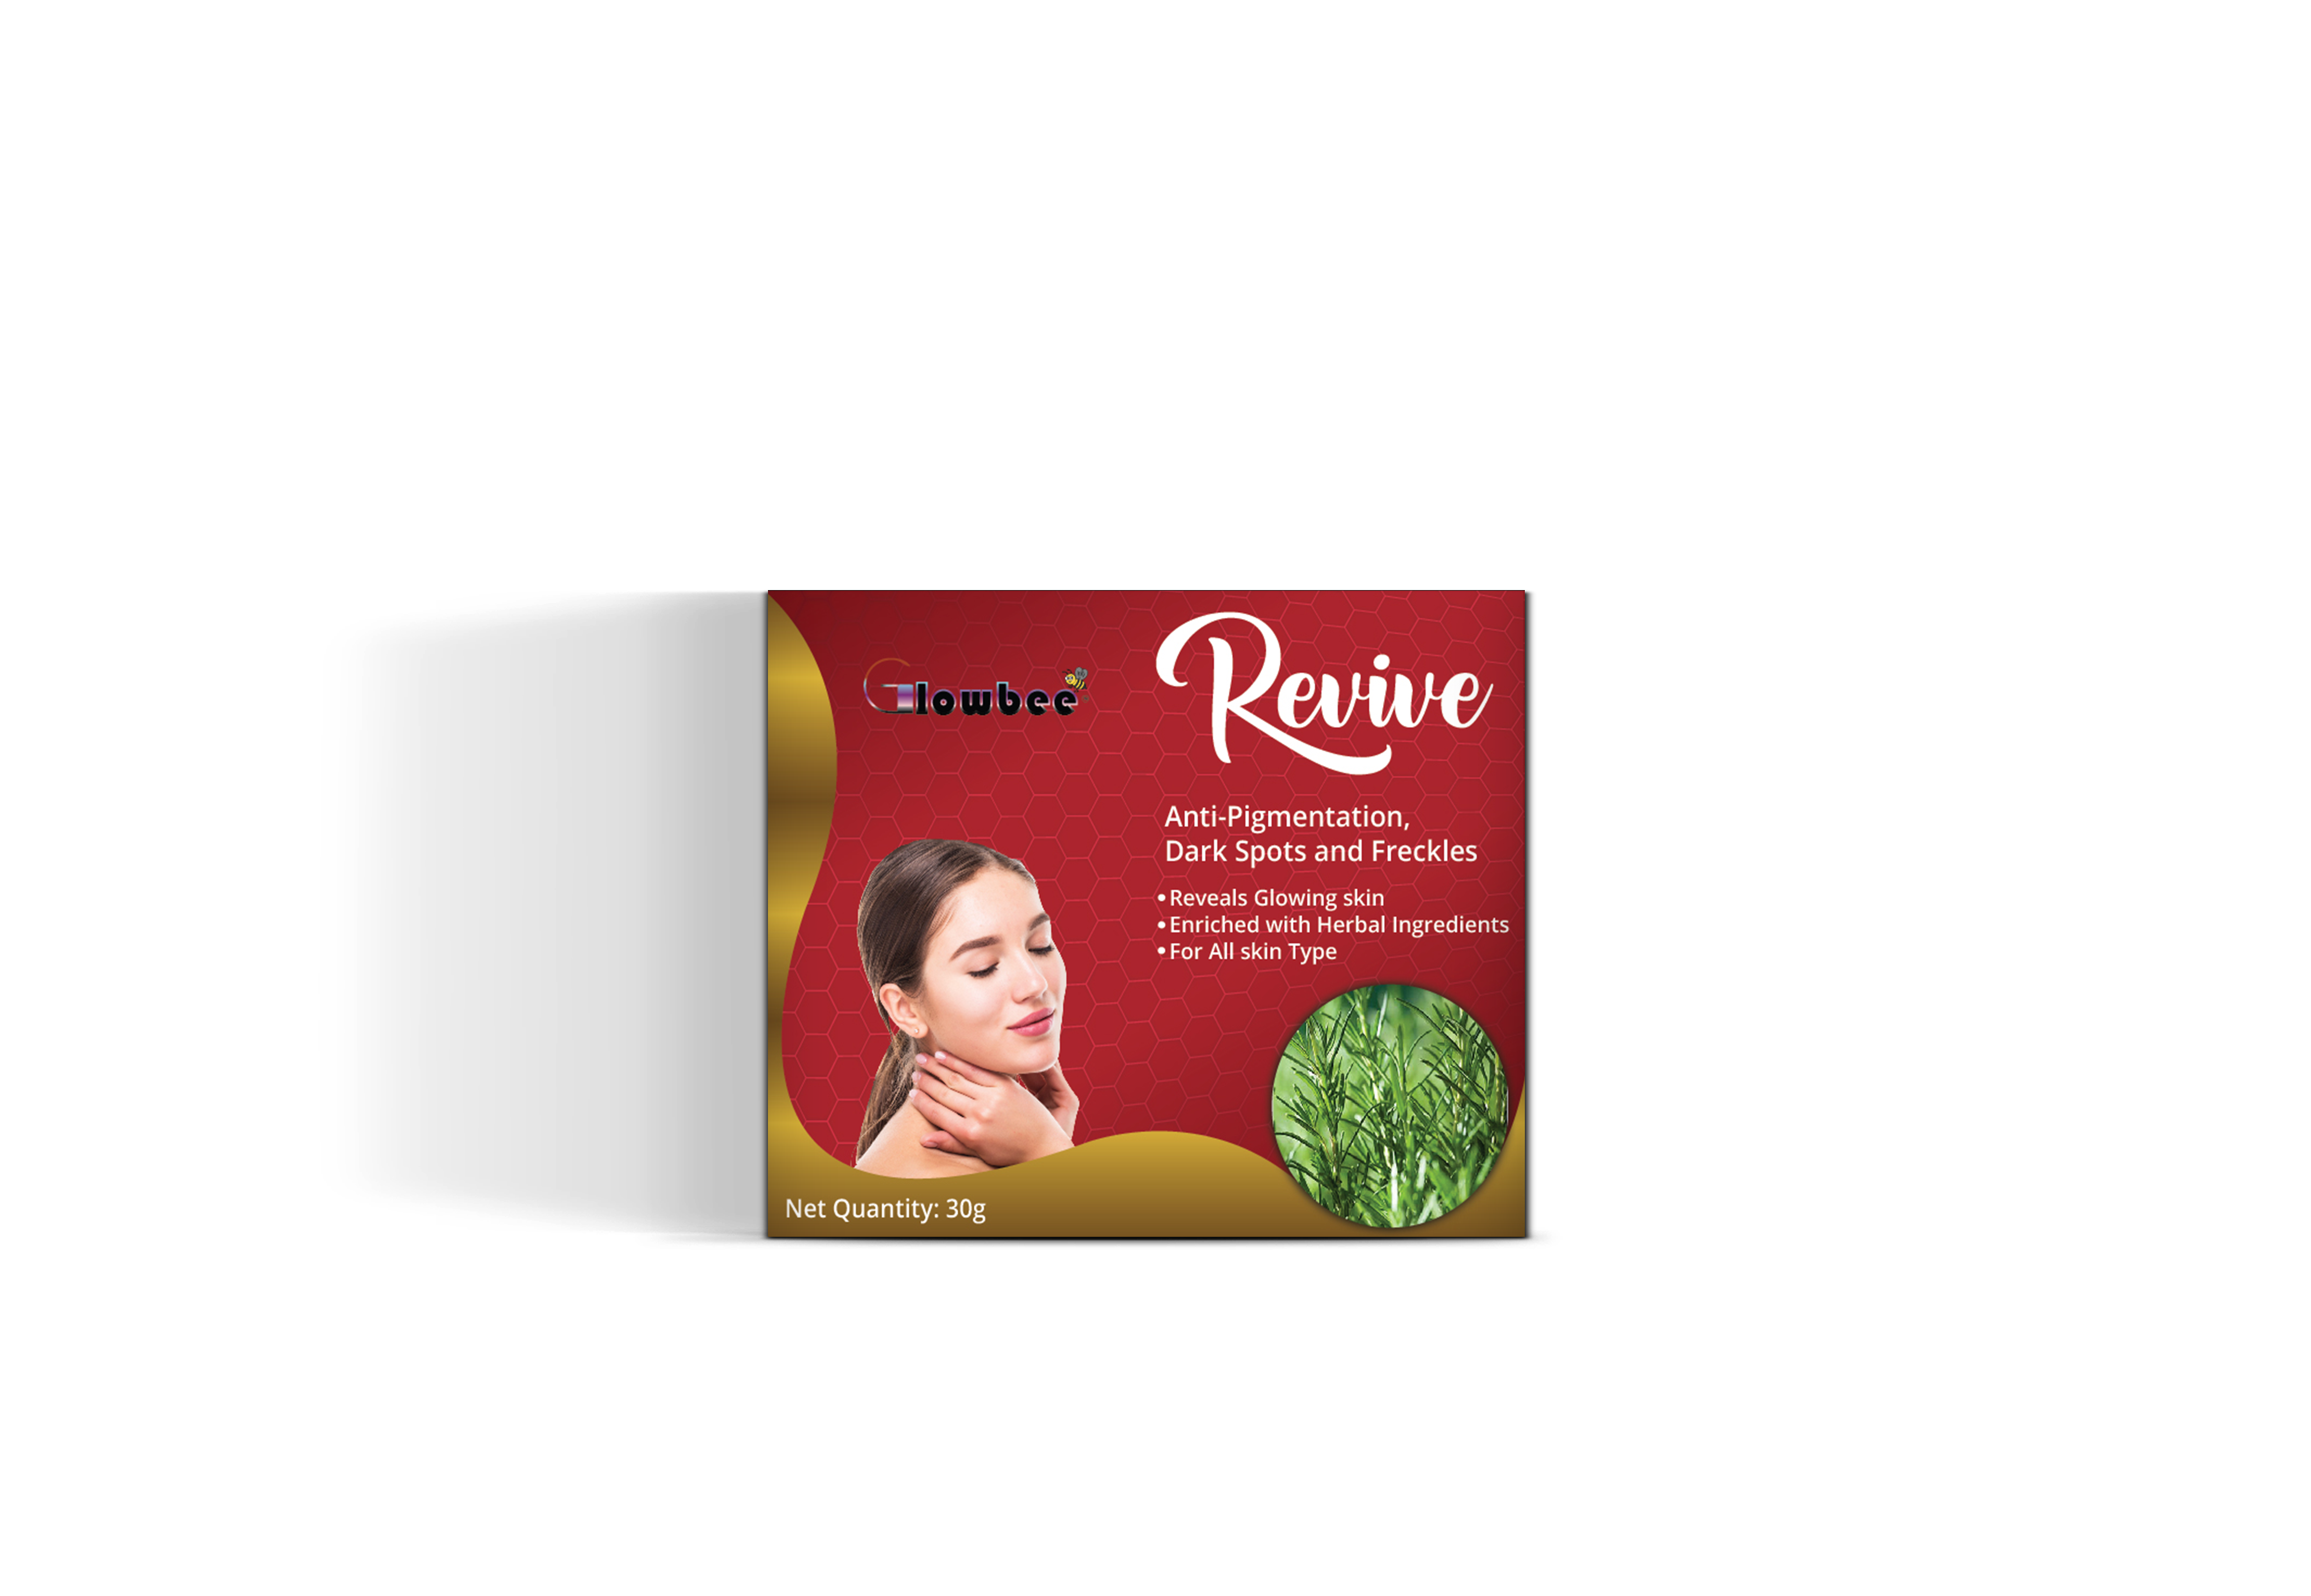 Glowbee Revive Herbal Pigmentation Removal & Whitening cream